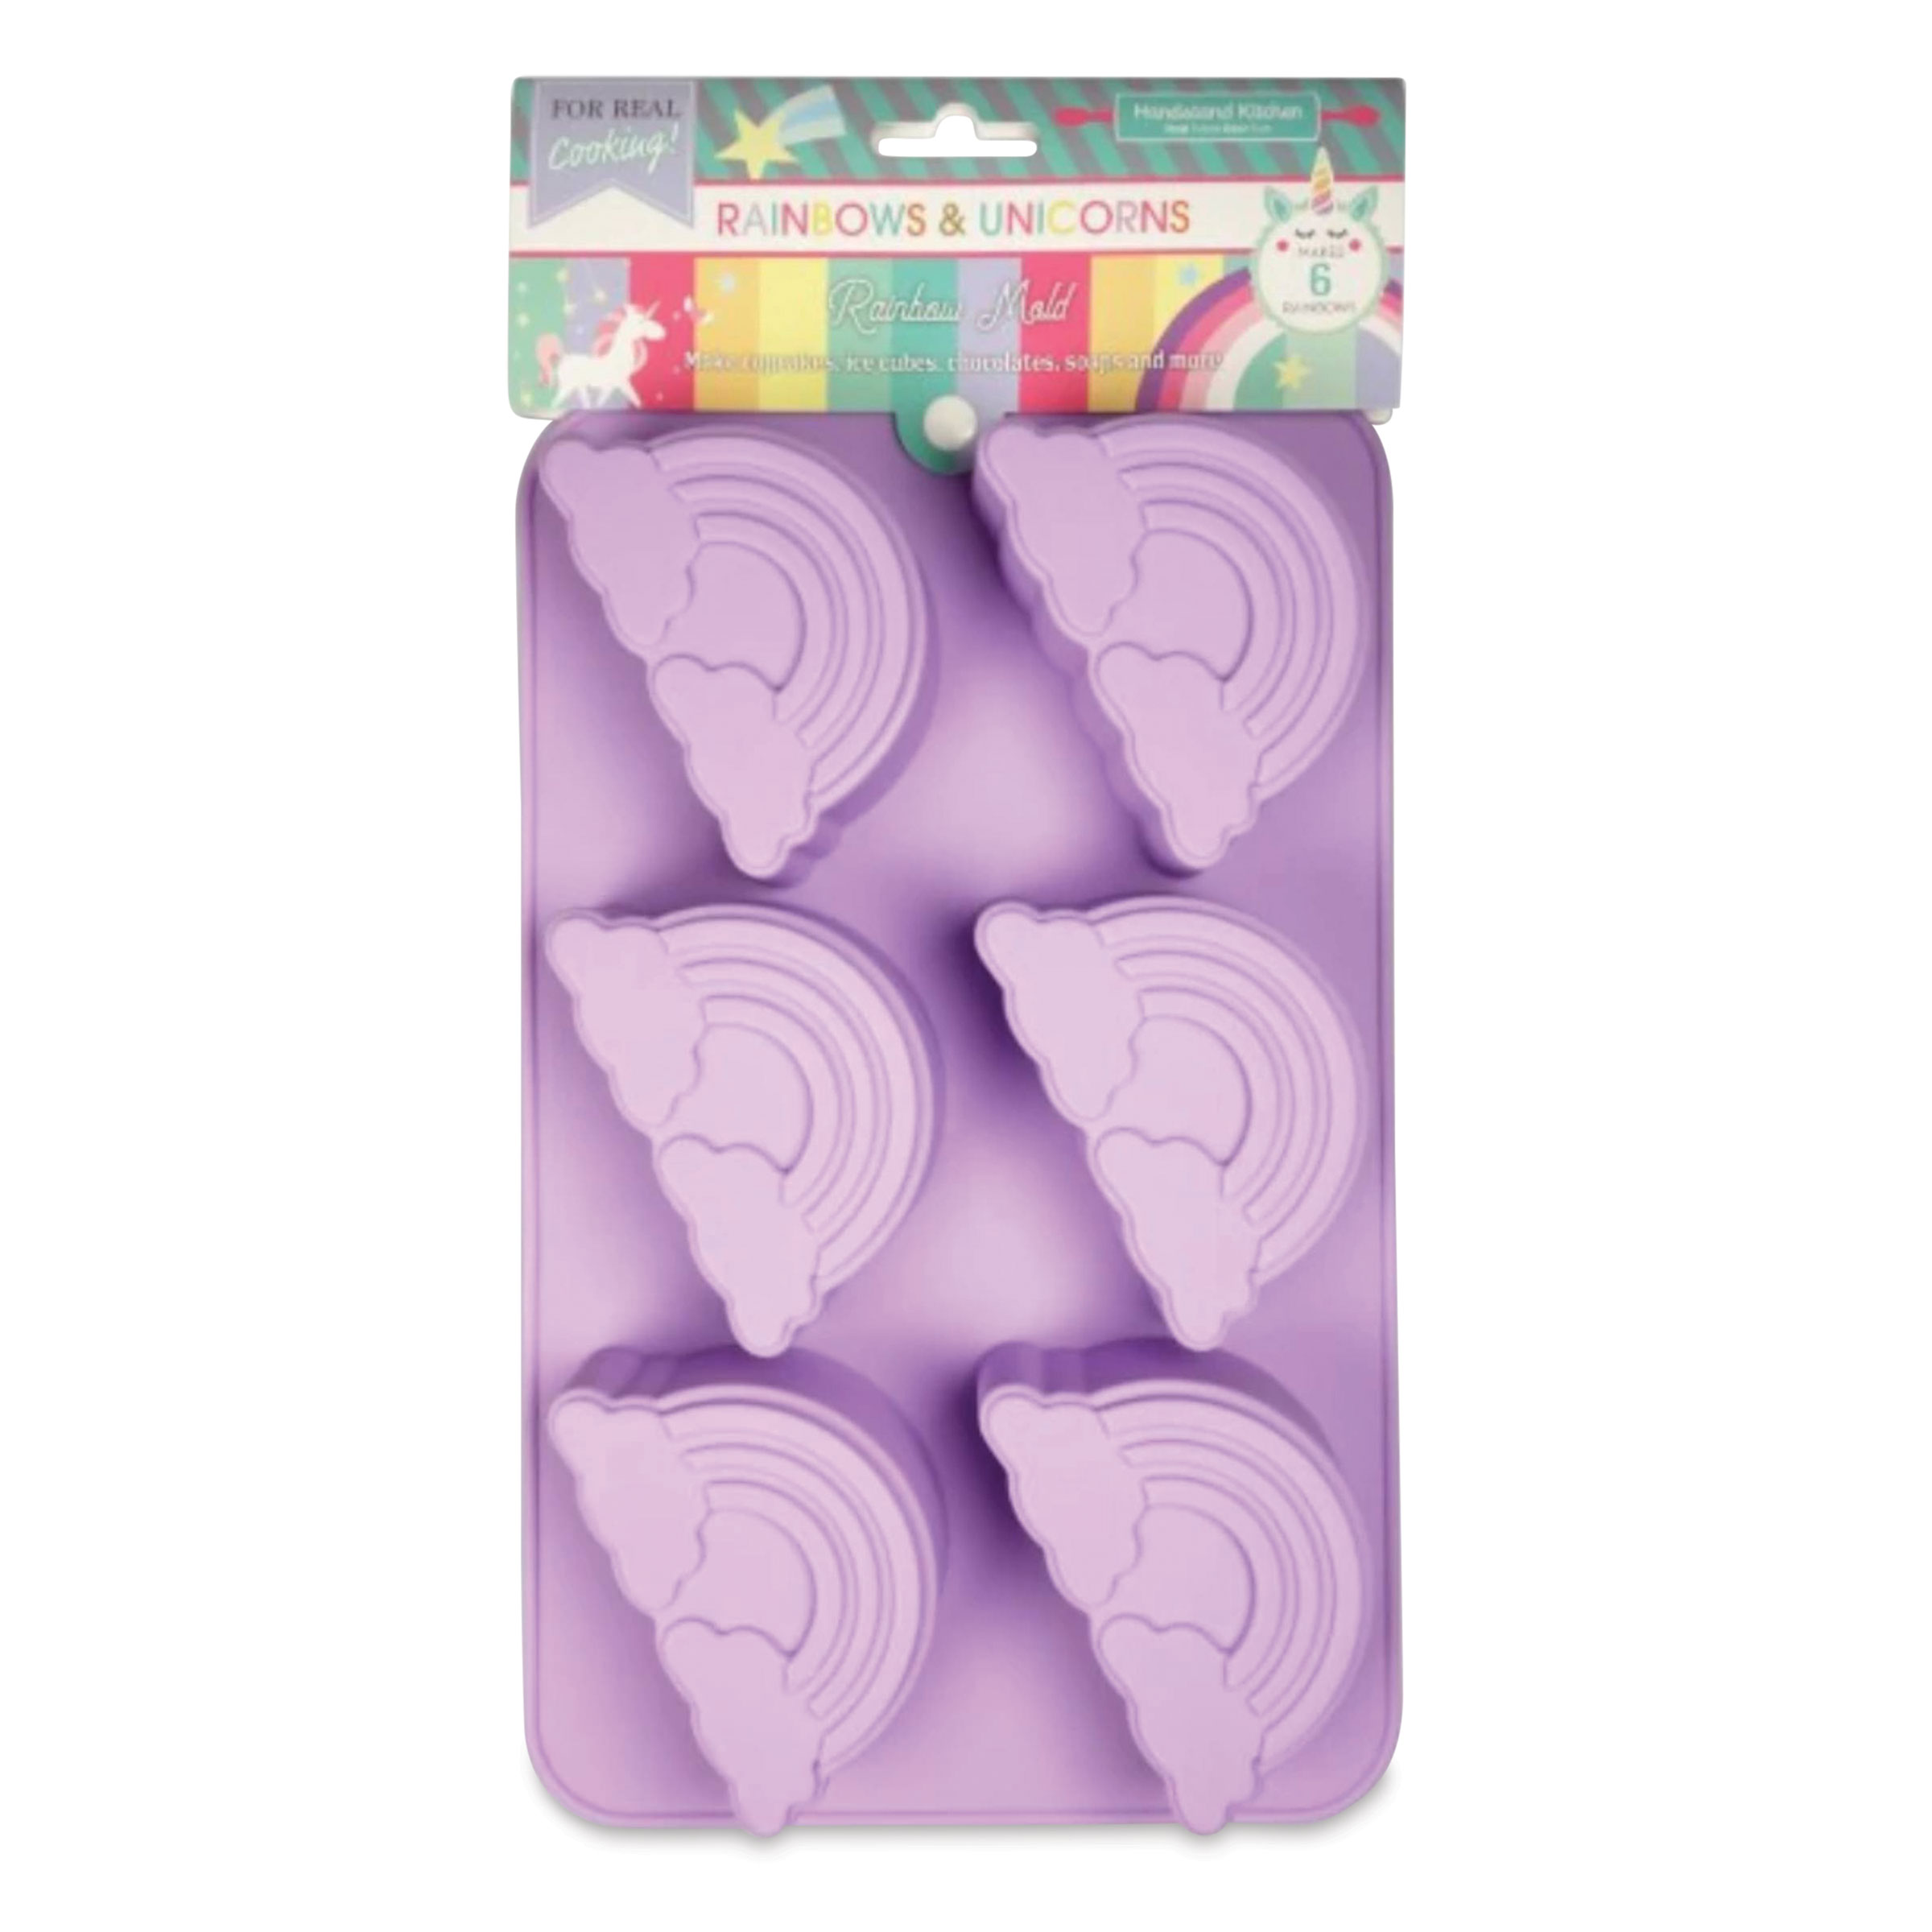 Handstand Kitchen Spring Fling Busy Bee Silicone Cupcake Mold